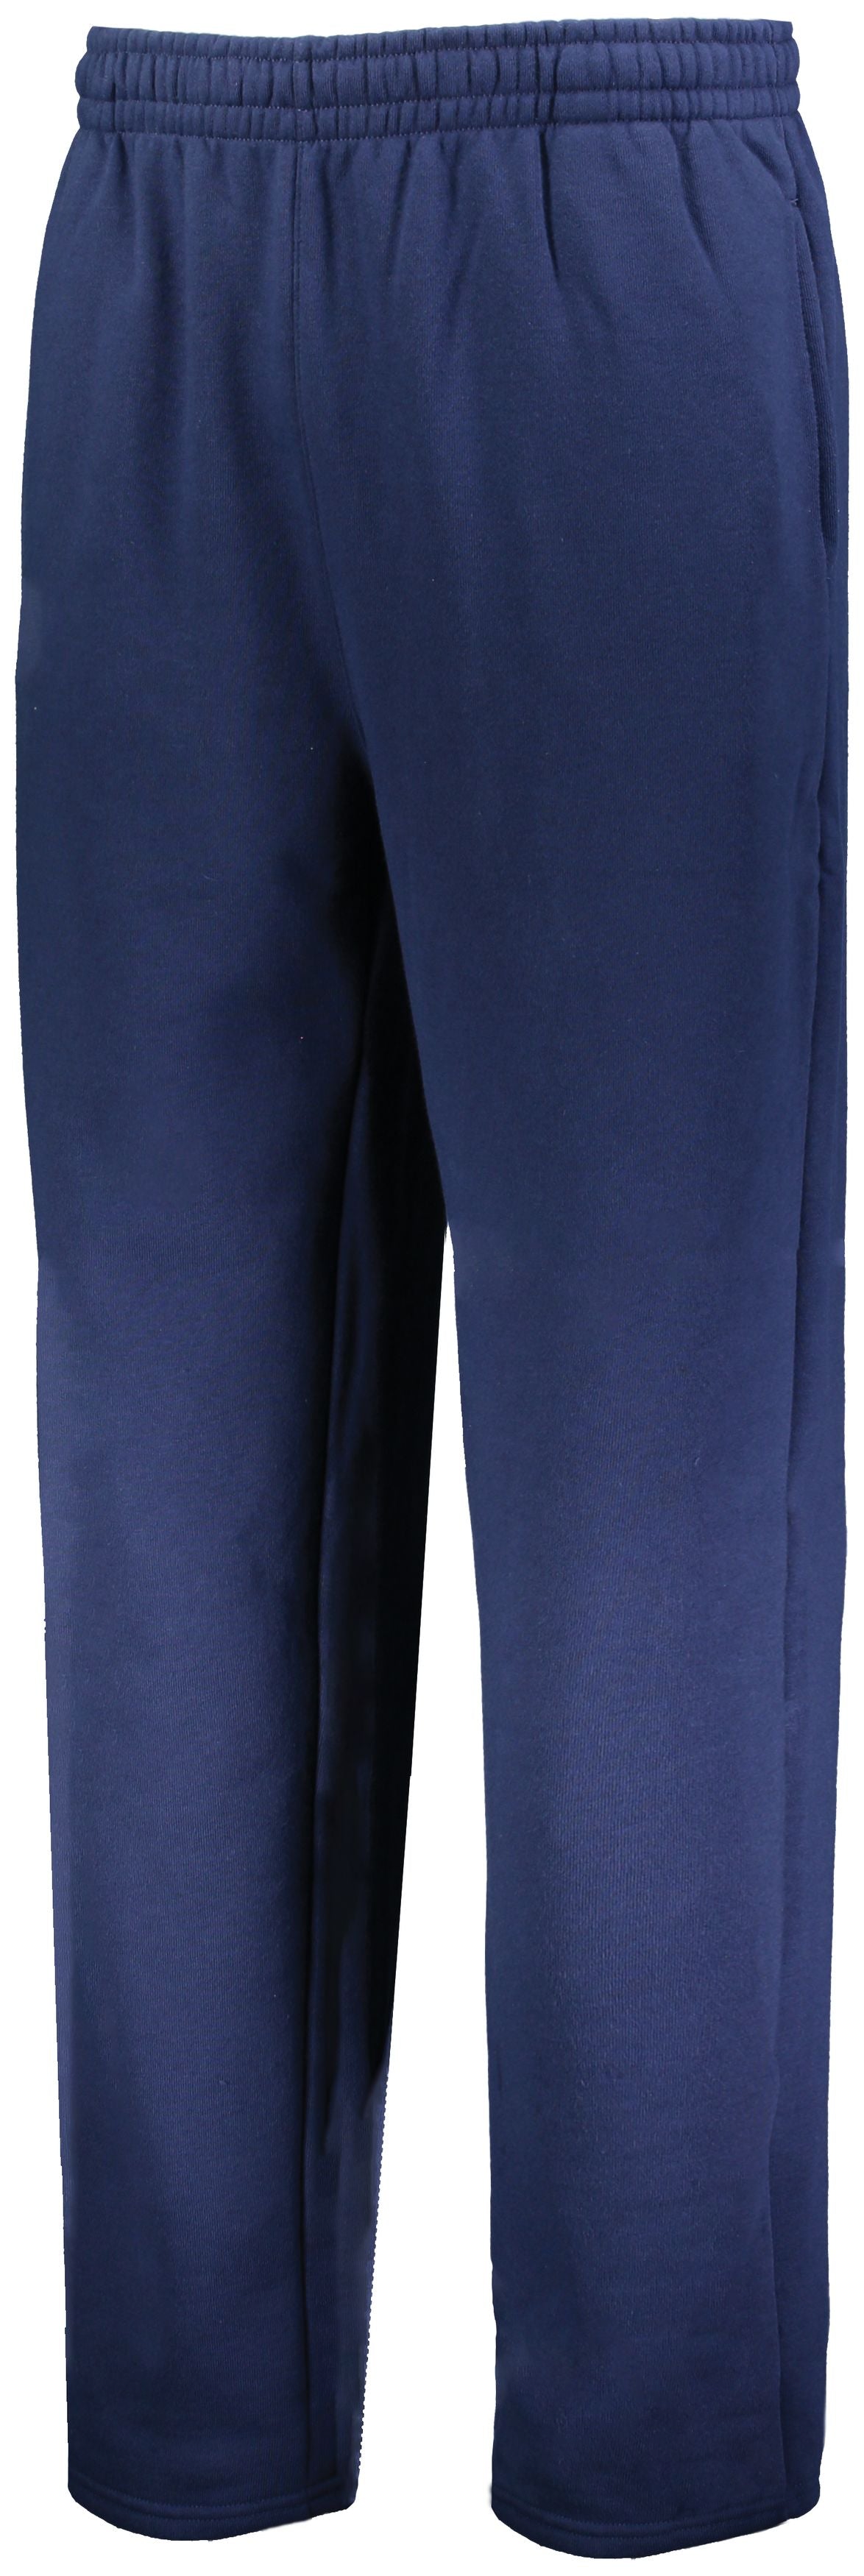 Russell Athletic 80/20 Open Bottom Sweatpant in Navy  -Part of the Adult, Adult-Pants, Pants, Russell-Athletic-Products product lines at KanaleyCreations.com